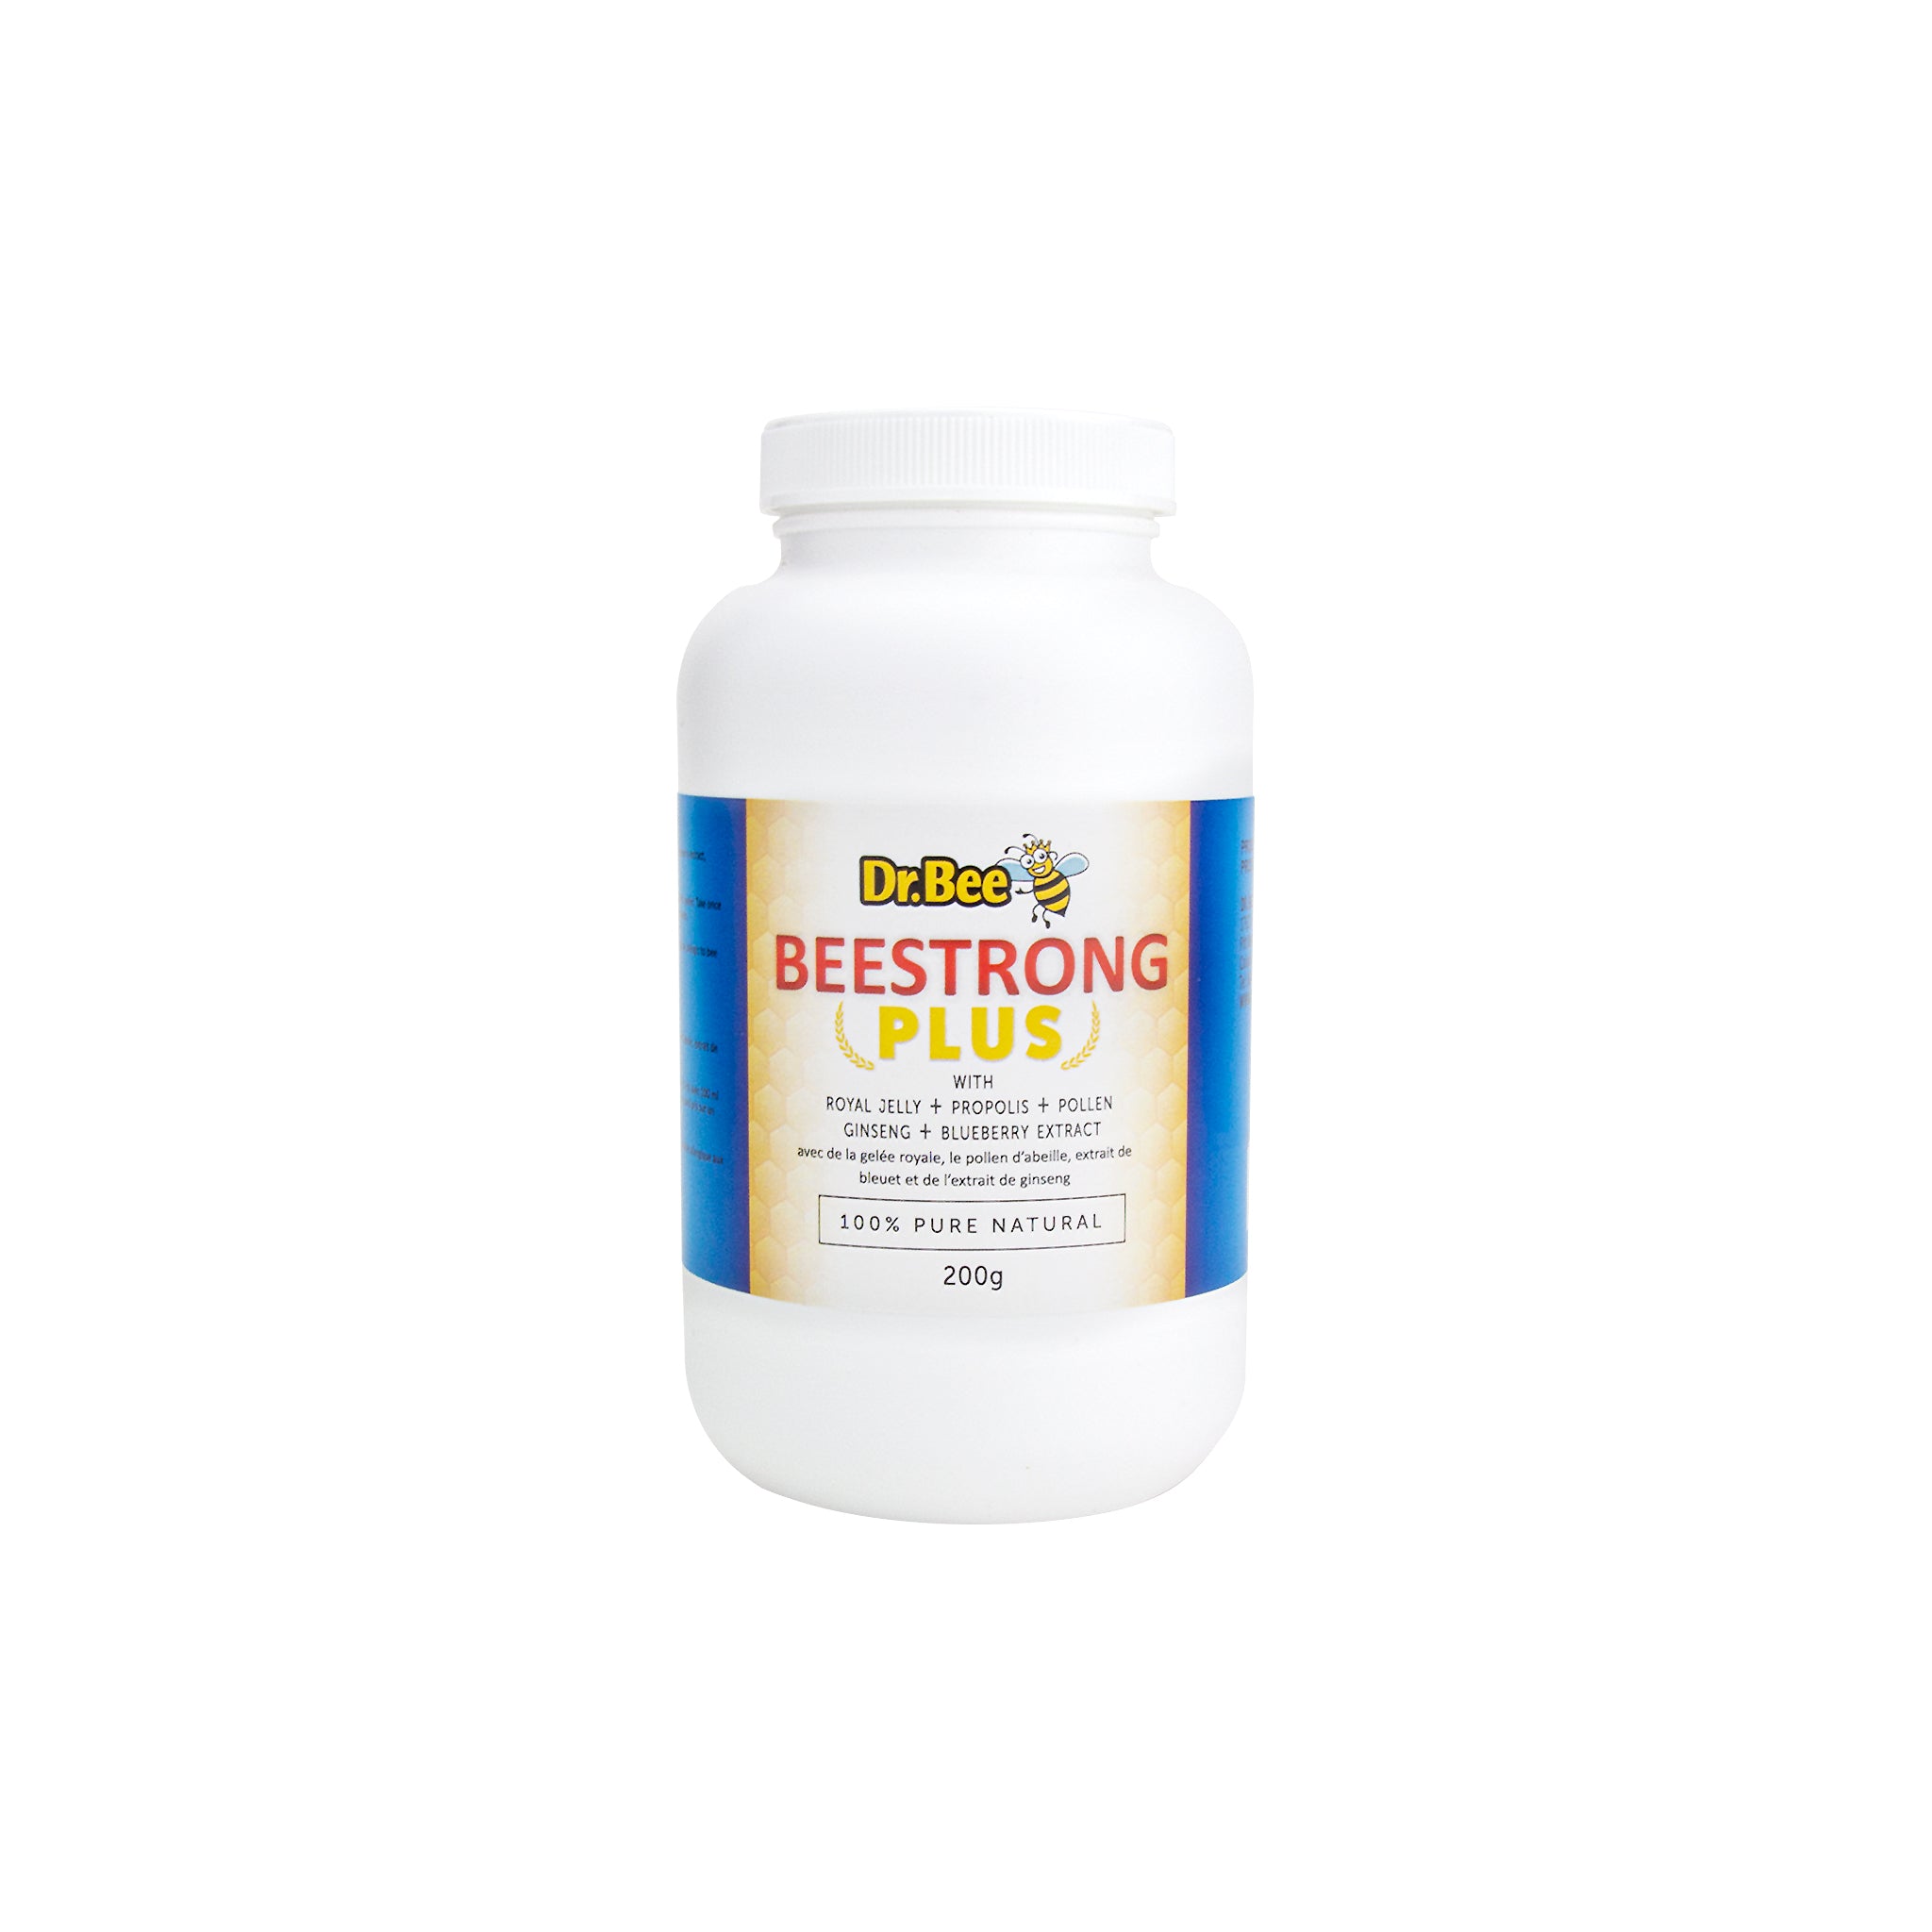 Beestrong Plus